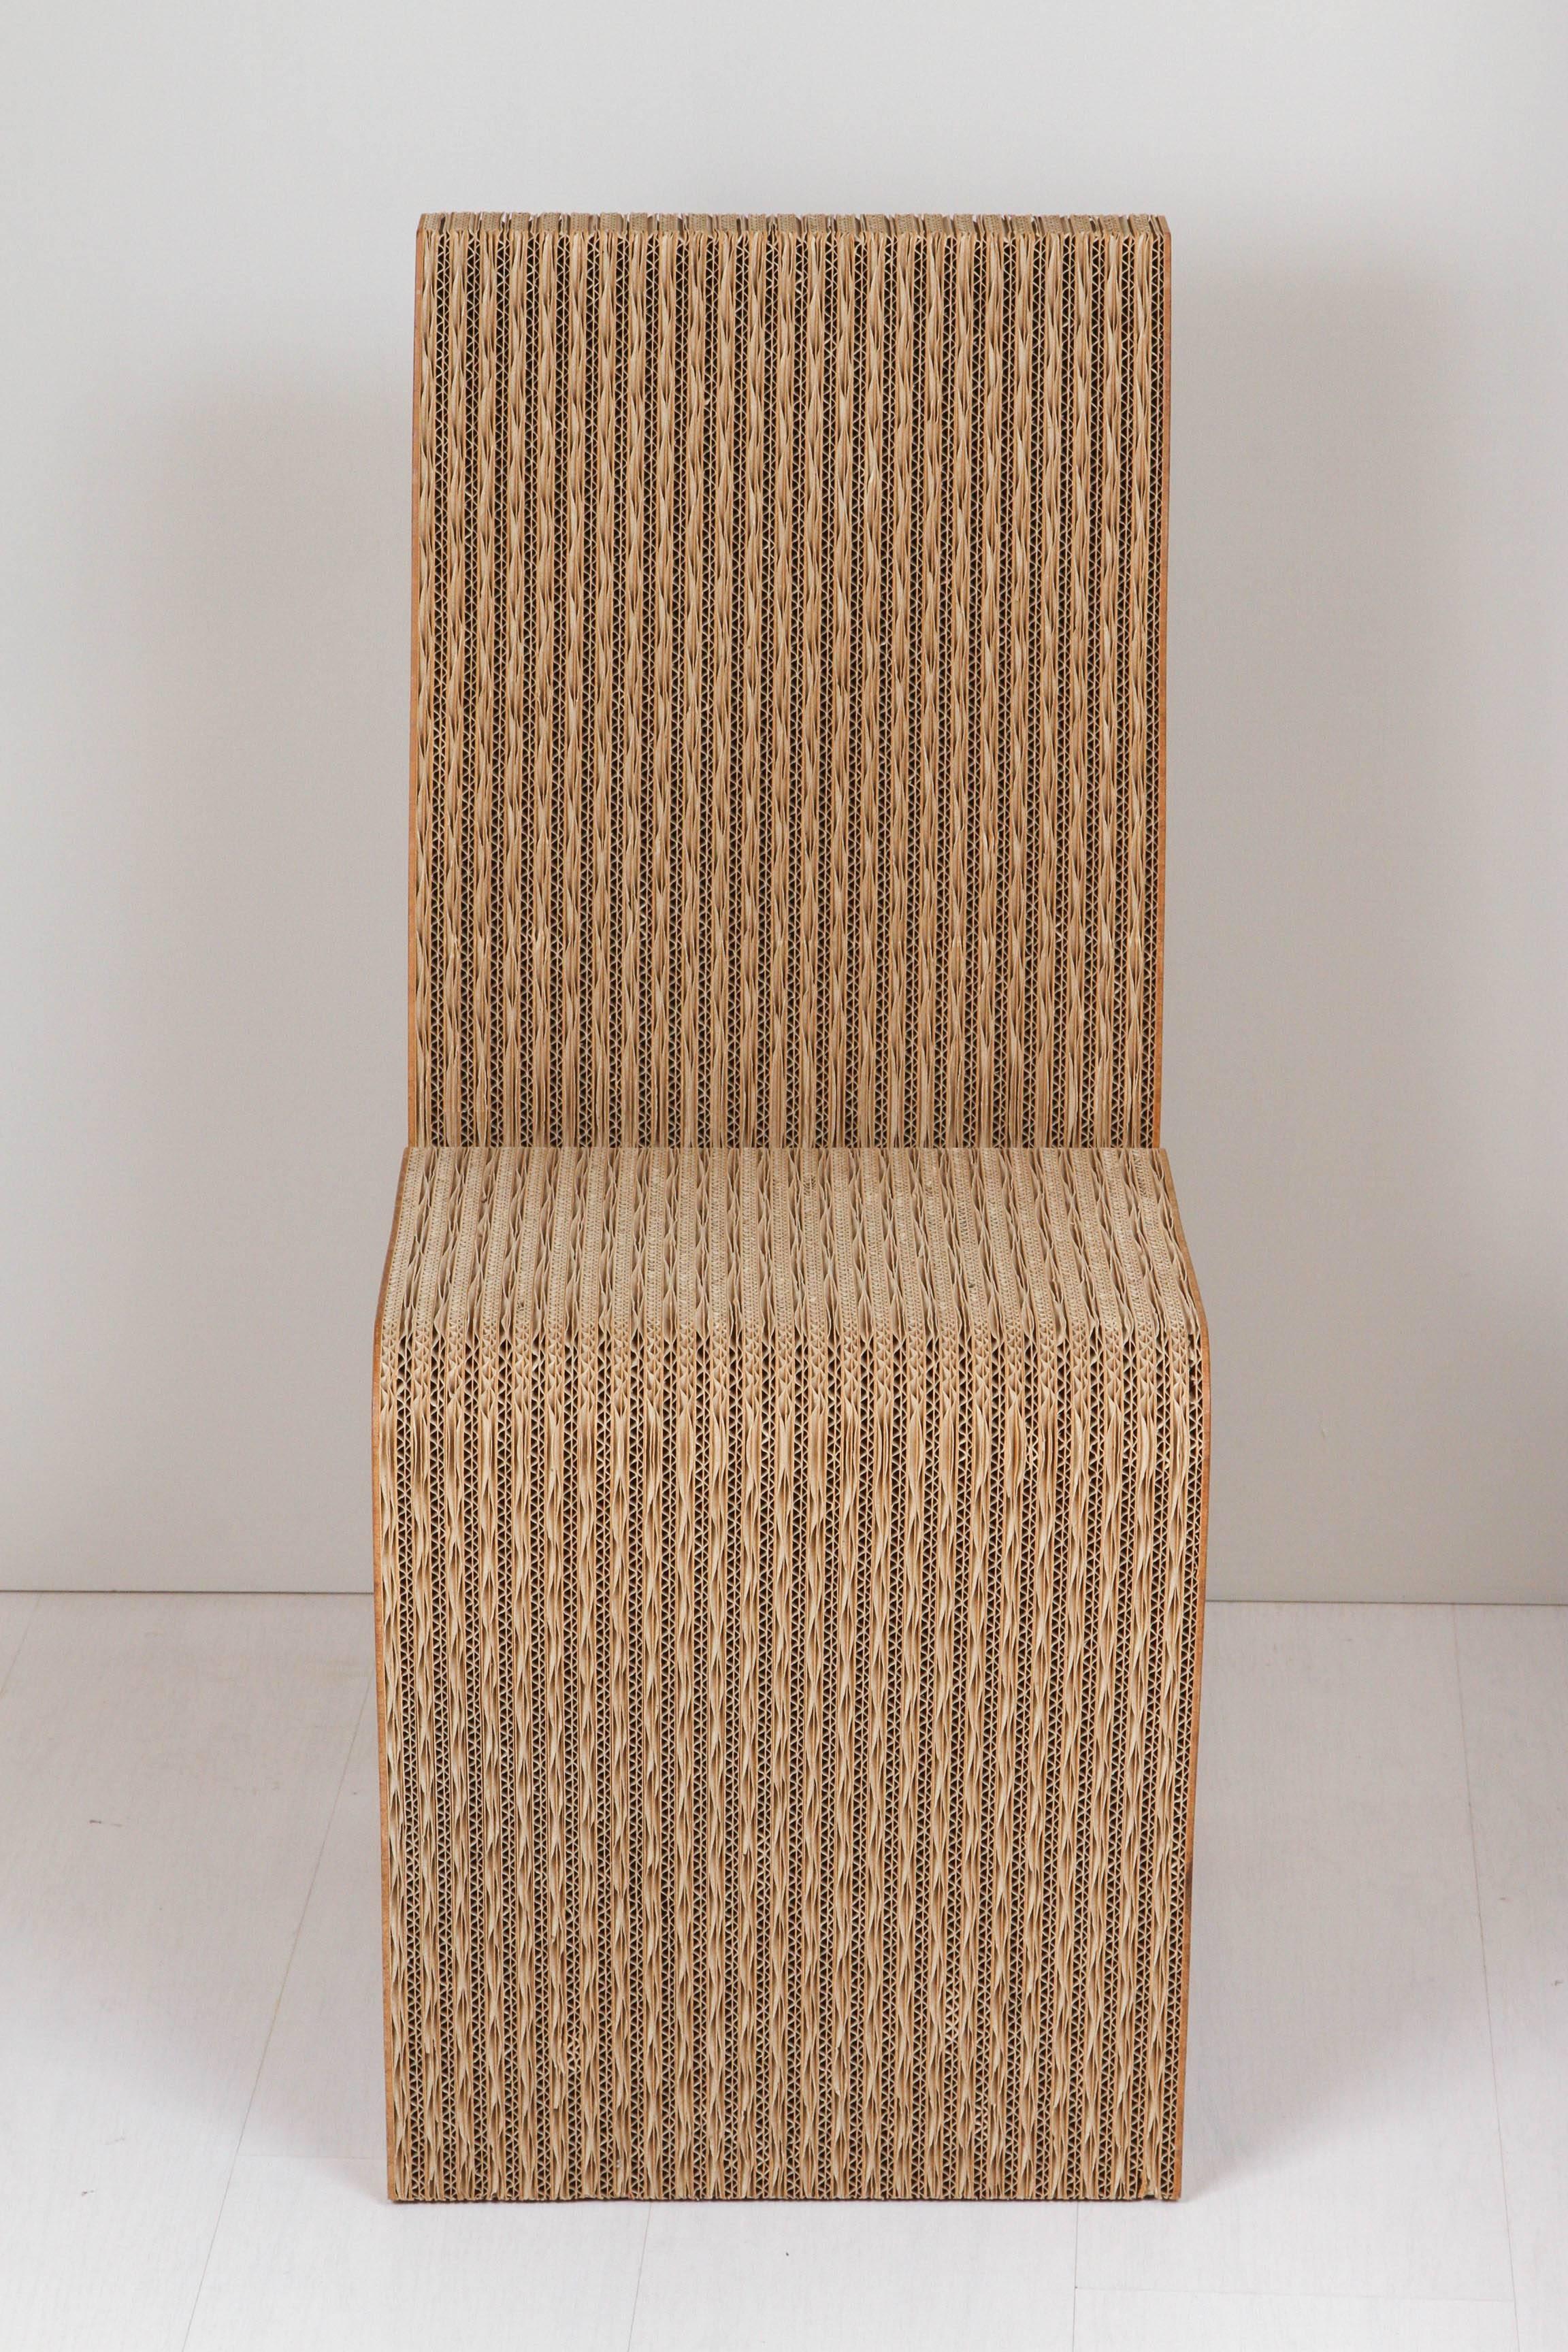 Other Frank Gehry Side Chair in Cardboard for Vitra Edition For Sale